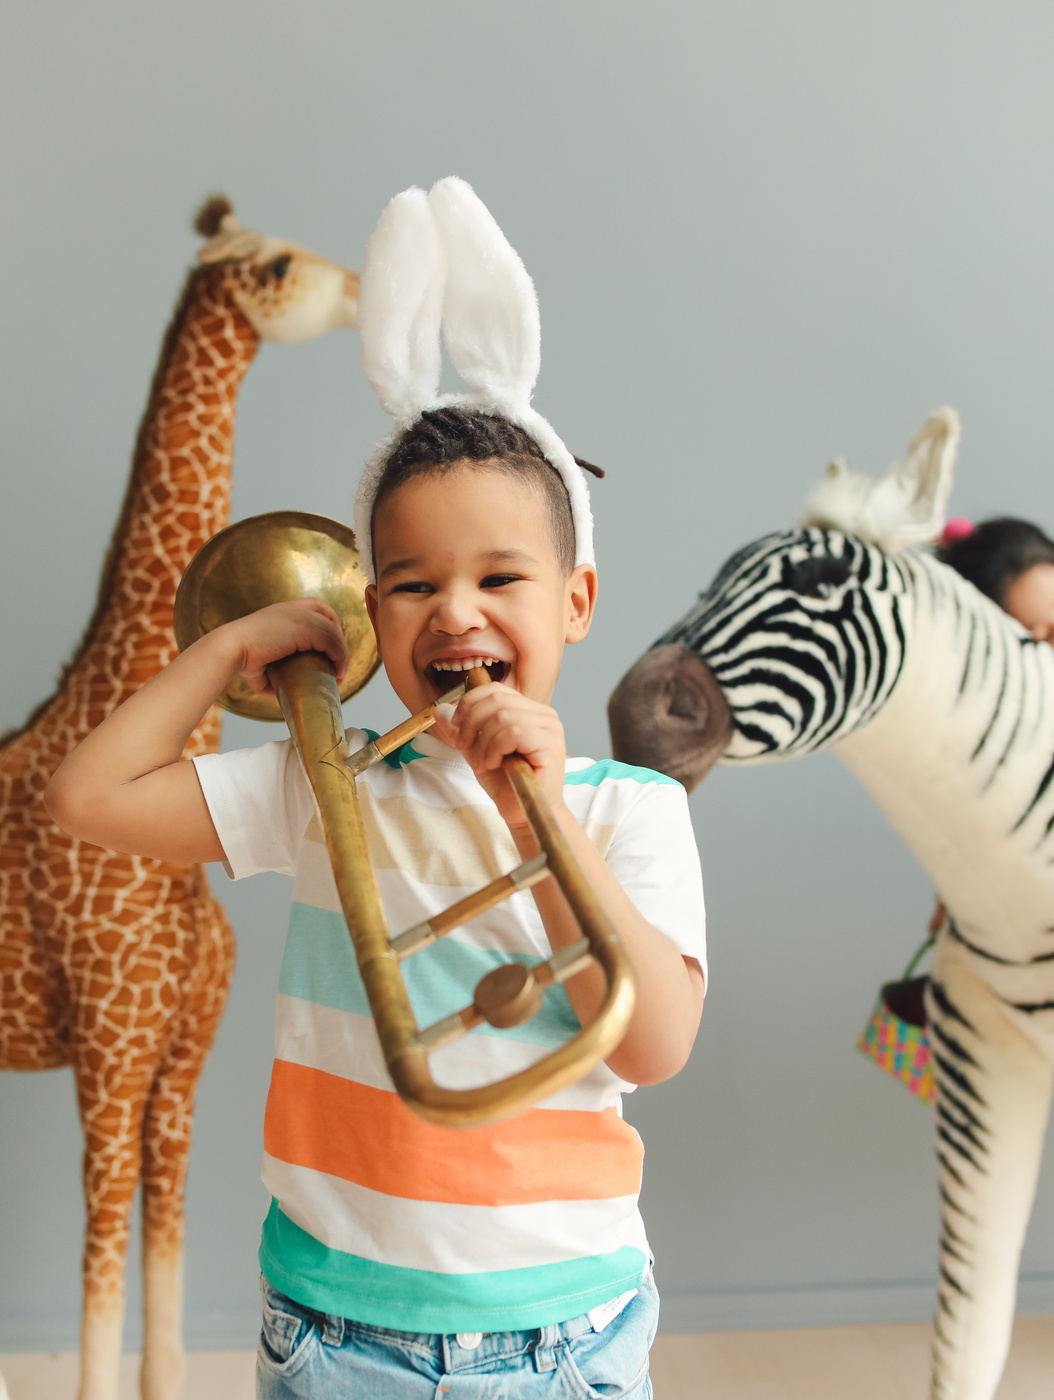 Boy with Trumpet with Animal Statues on Background